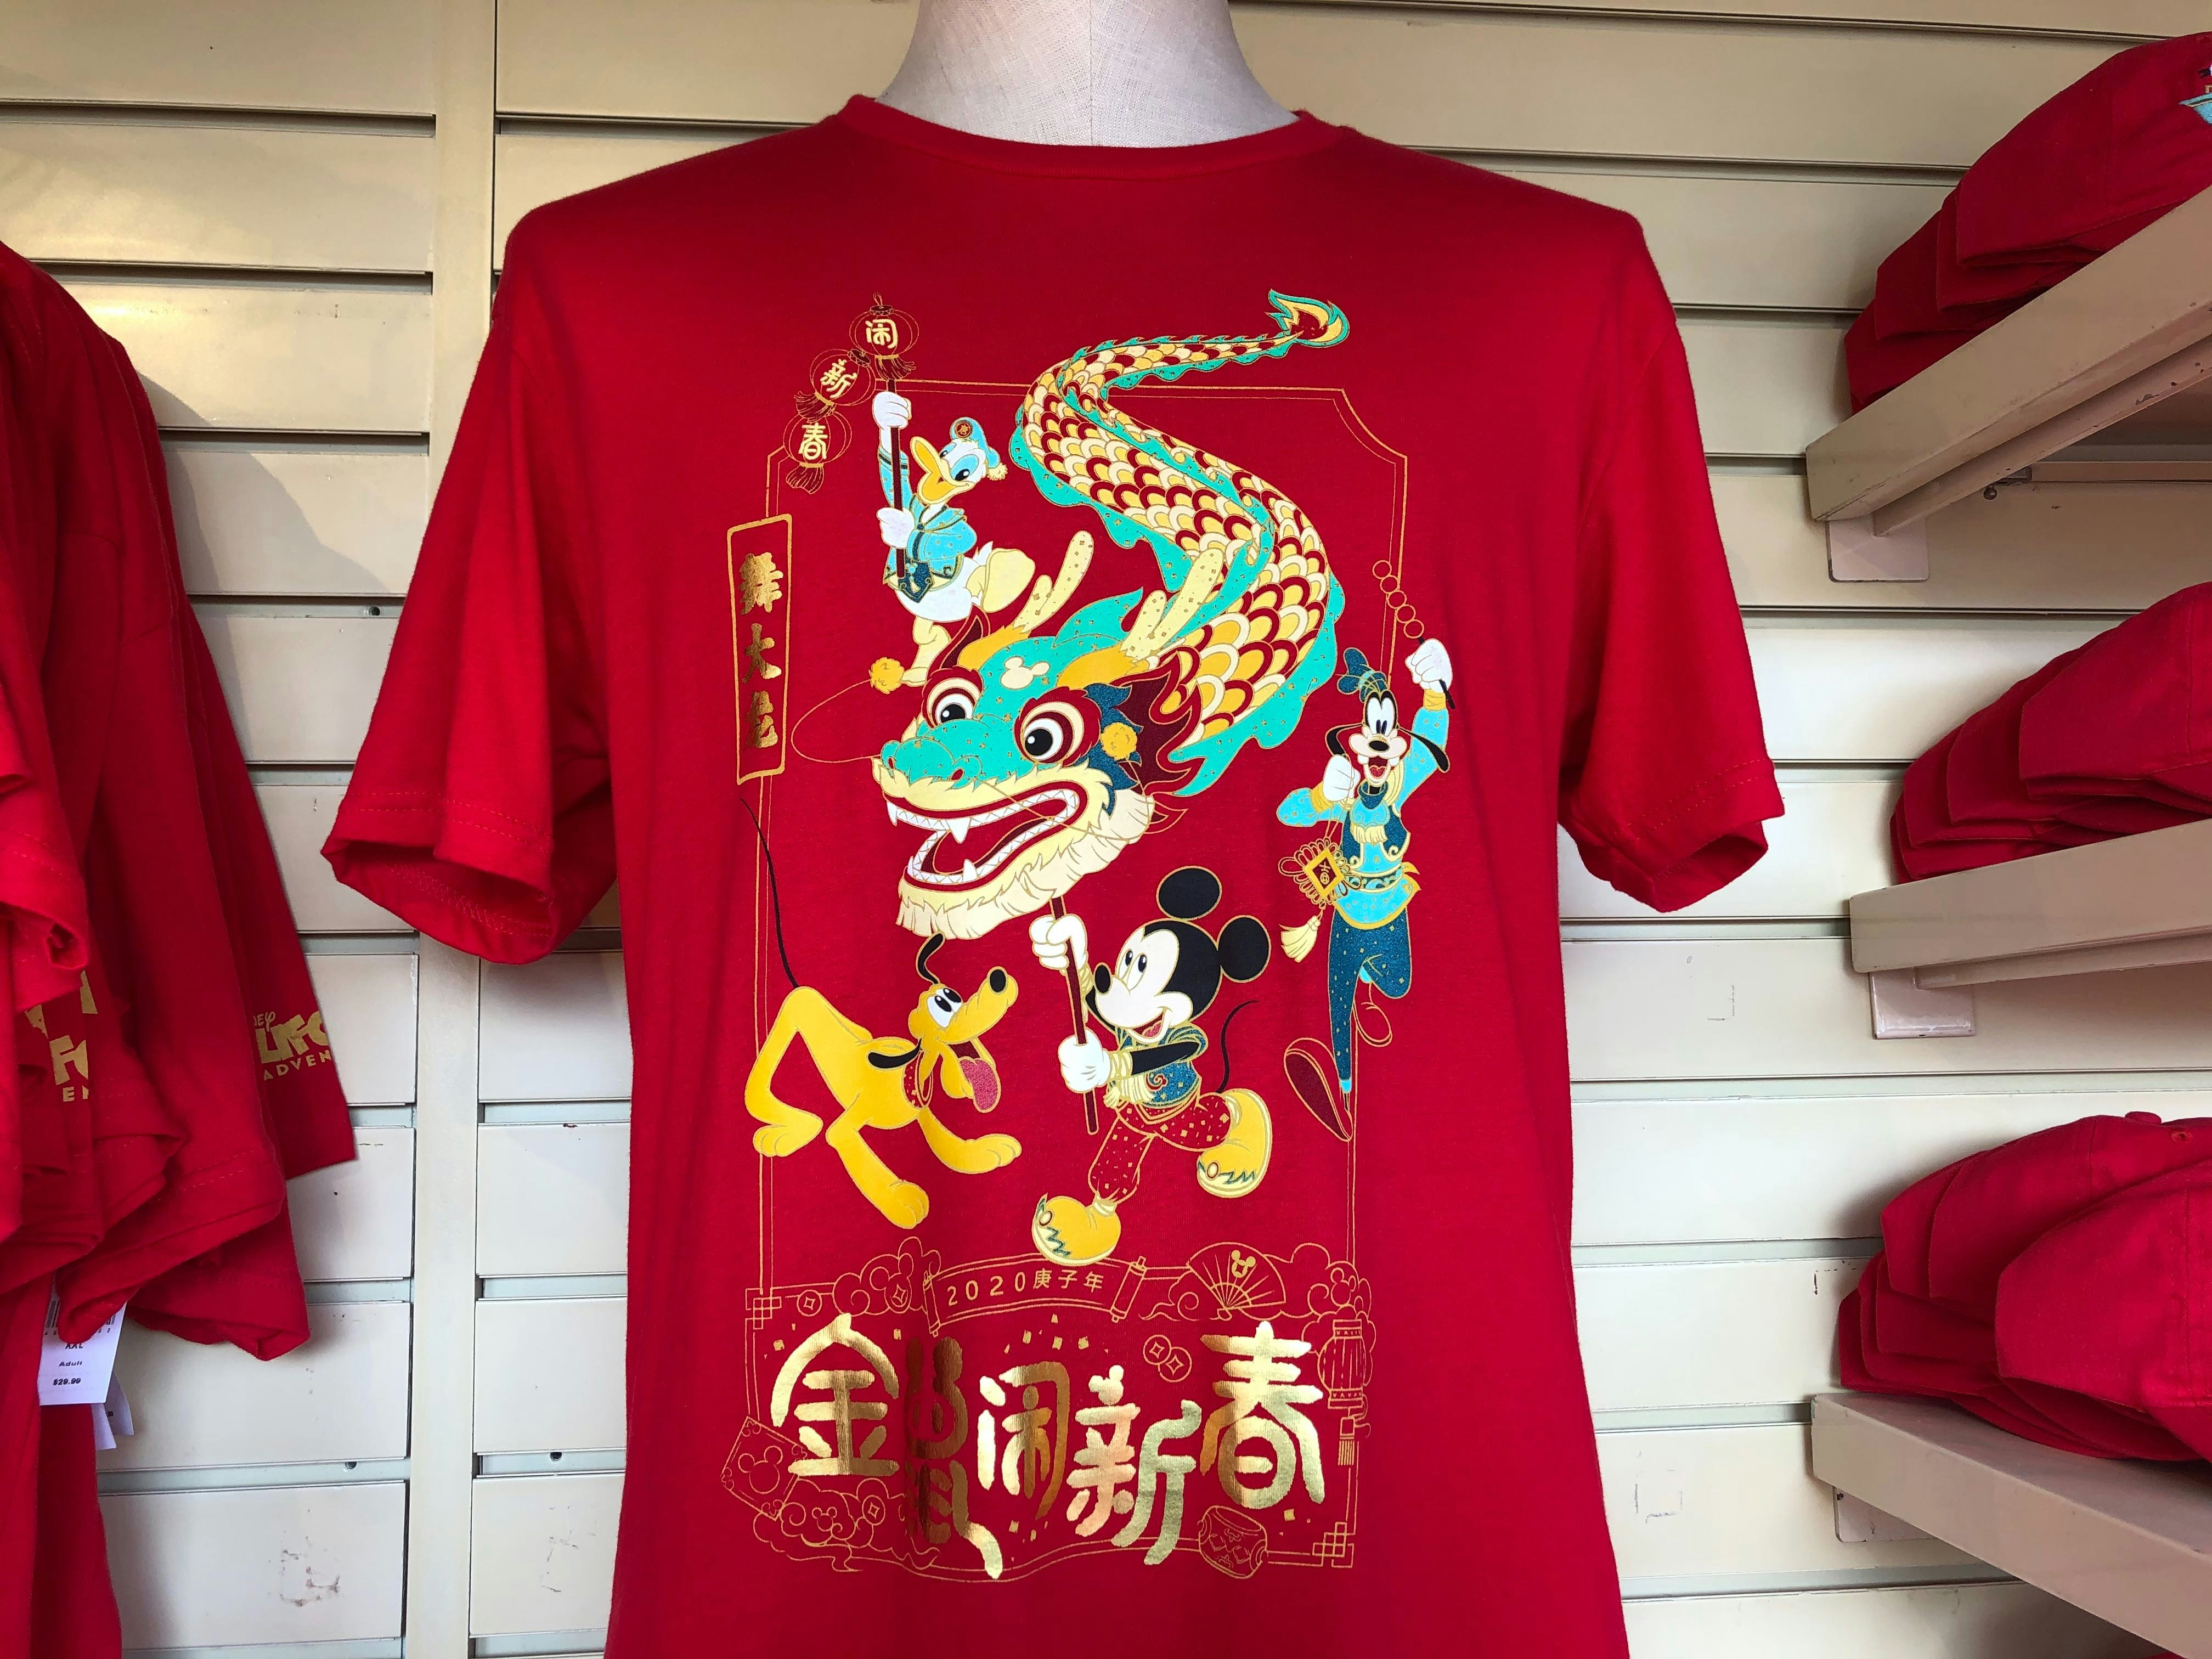 PHOTOS Every Piece of Lunar New Year 2020 Merchandise (with Prices) at